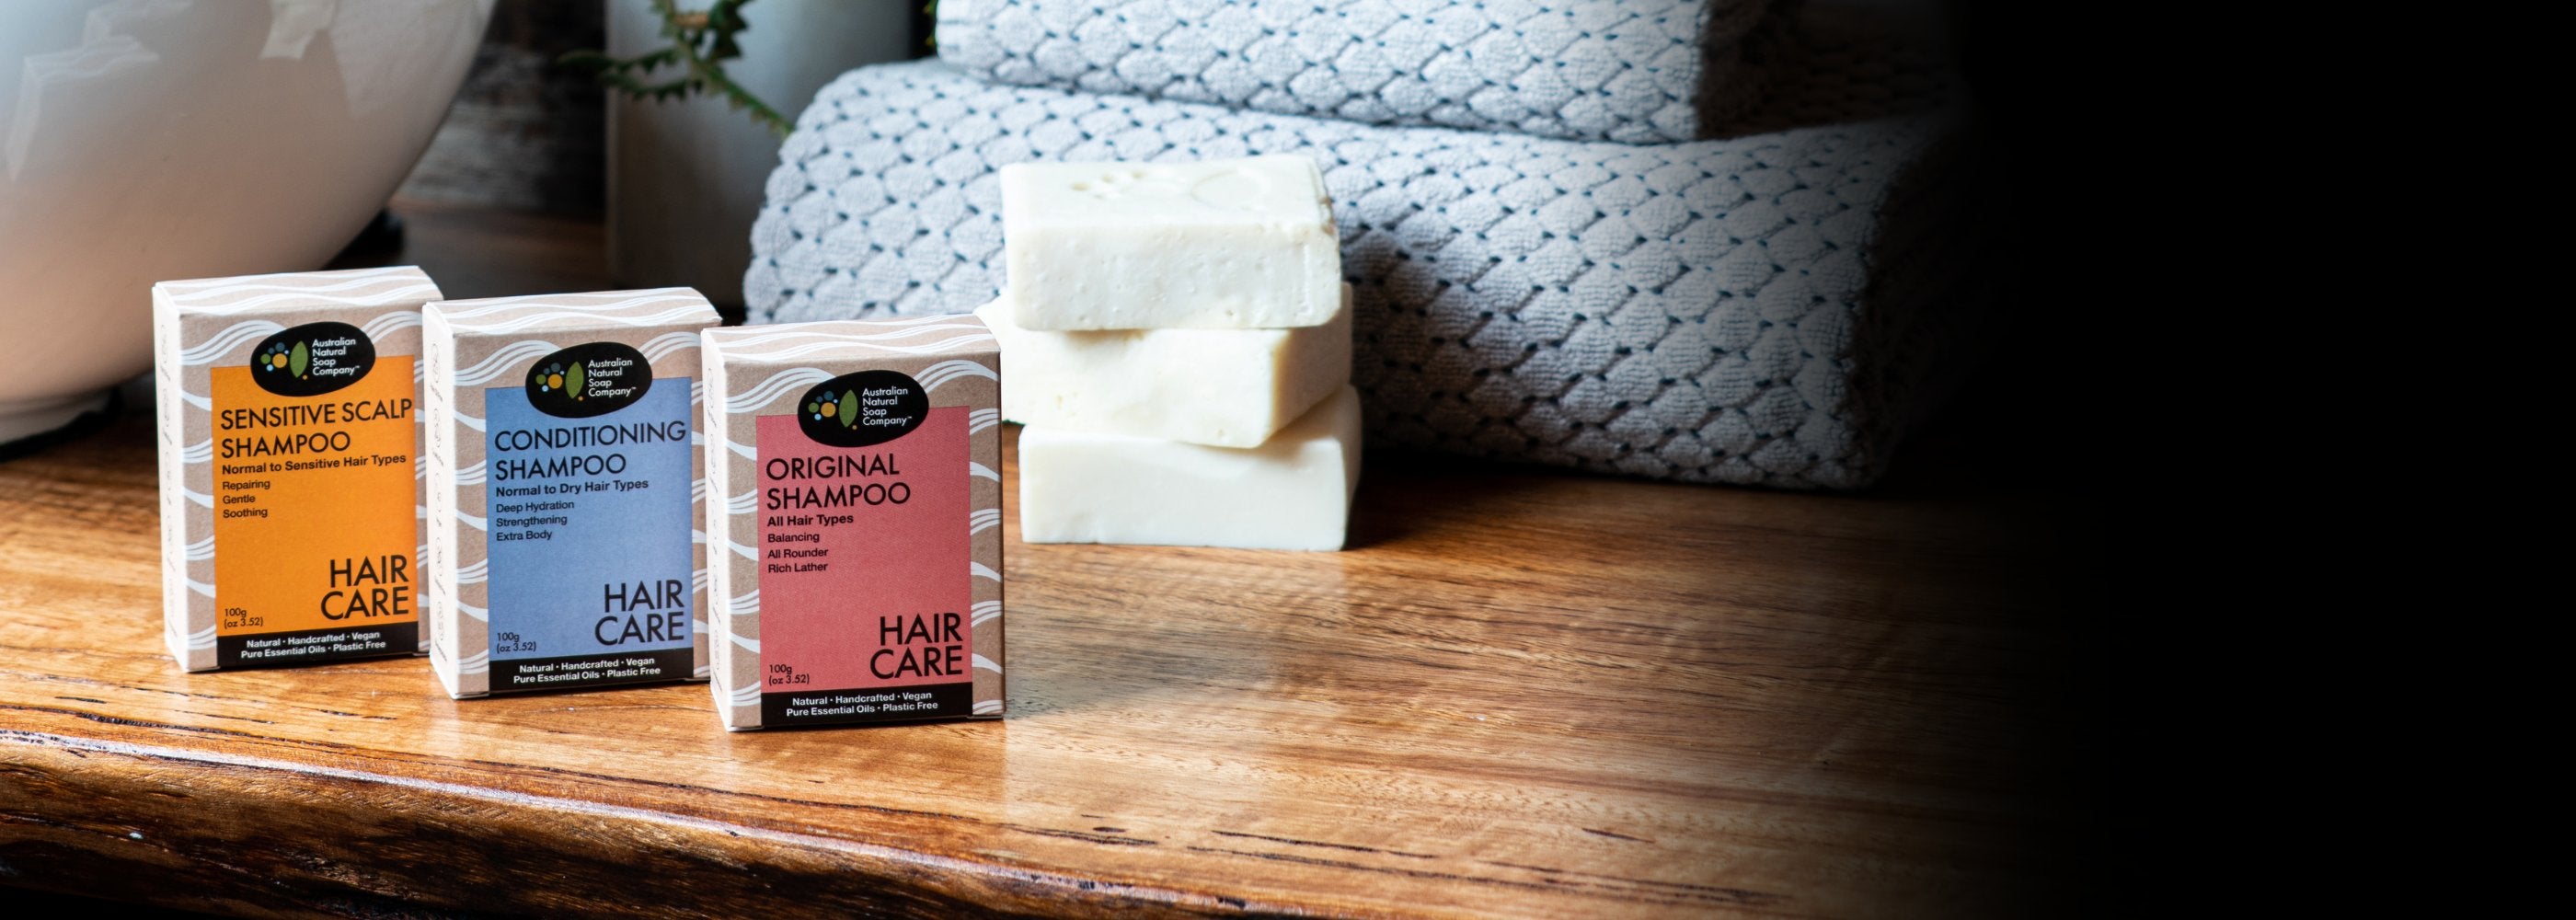 Soap for hair care